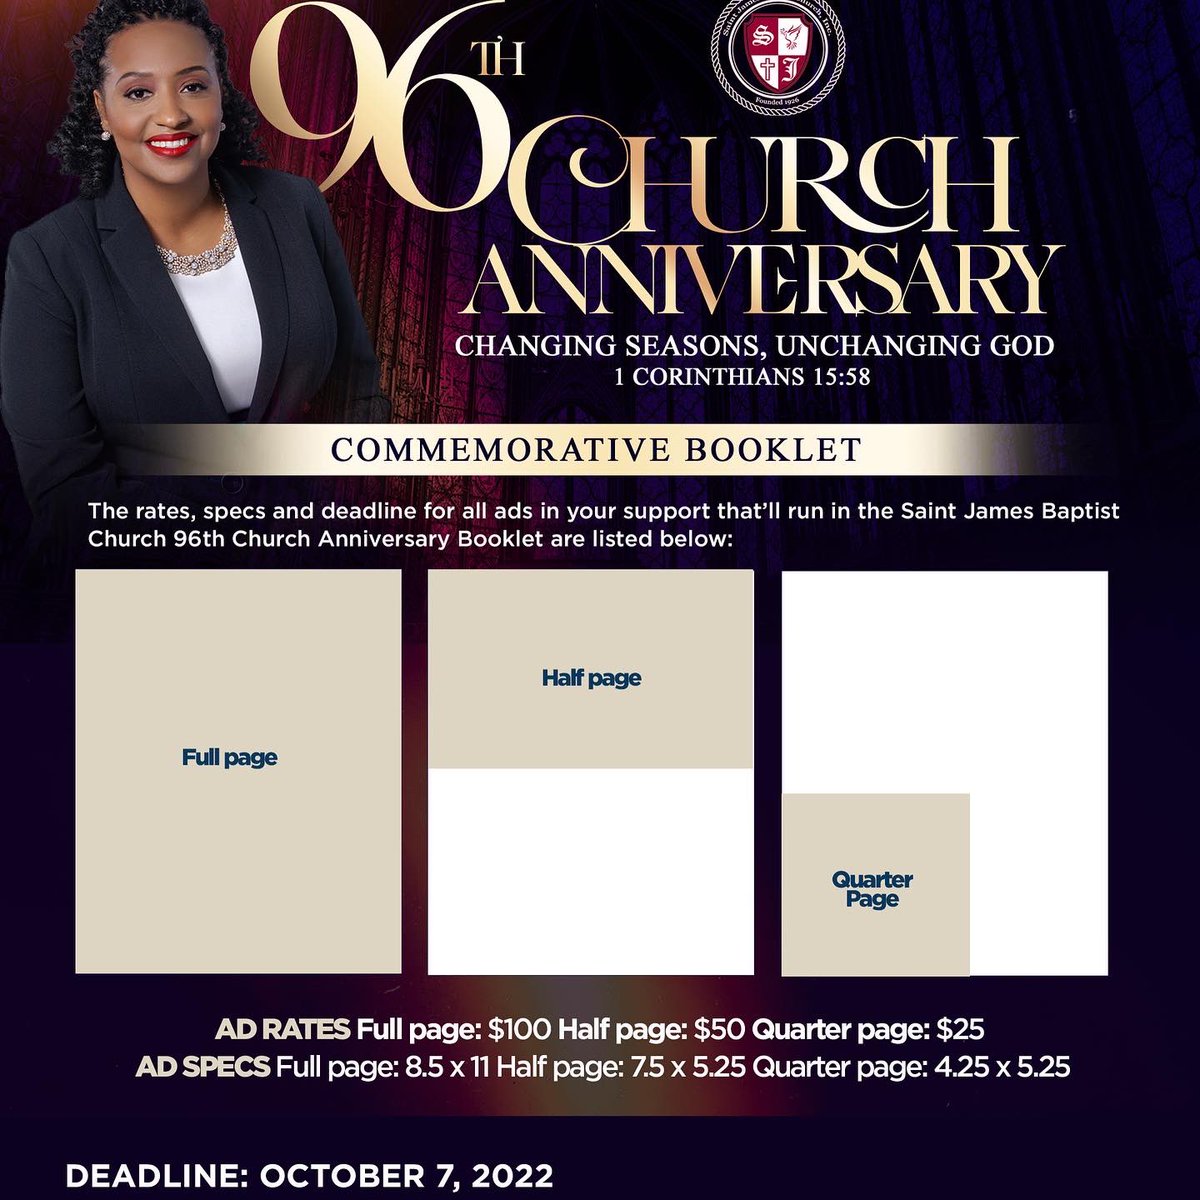 Saint James Baptist Church, Inc. 96th Church Anniversary will commence on November 6th at 10AM. This year, there will be a commemorative booklet for ads. Please see the flyer for submission instructions and deadlines. #changingseasons #UnchangingGod